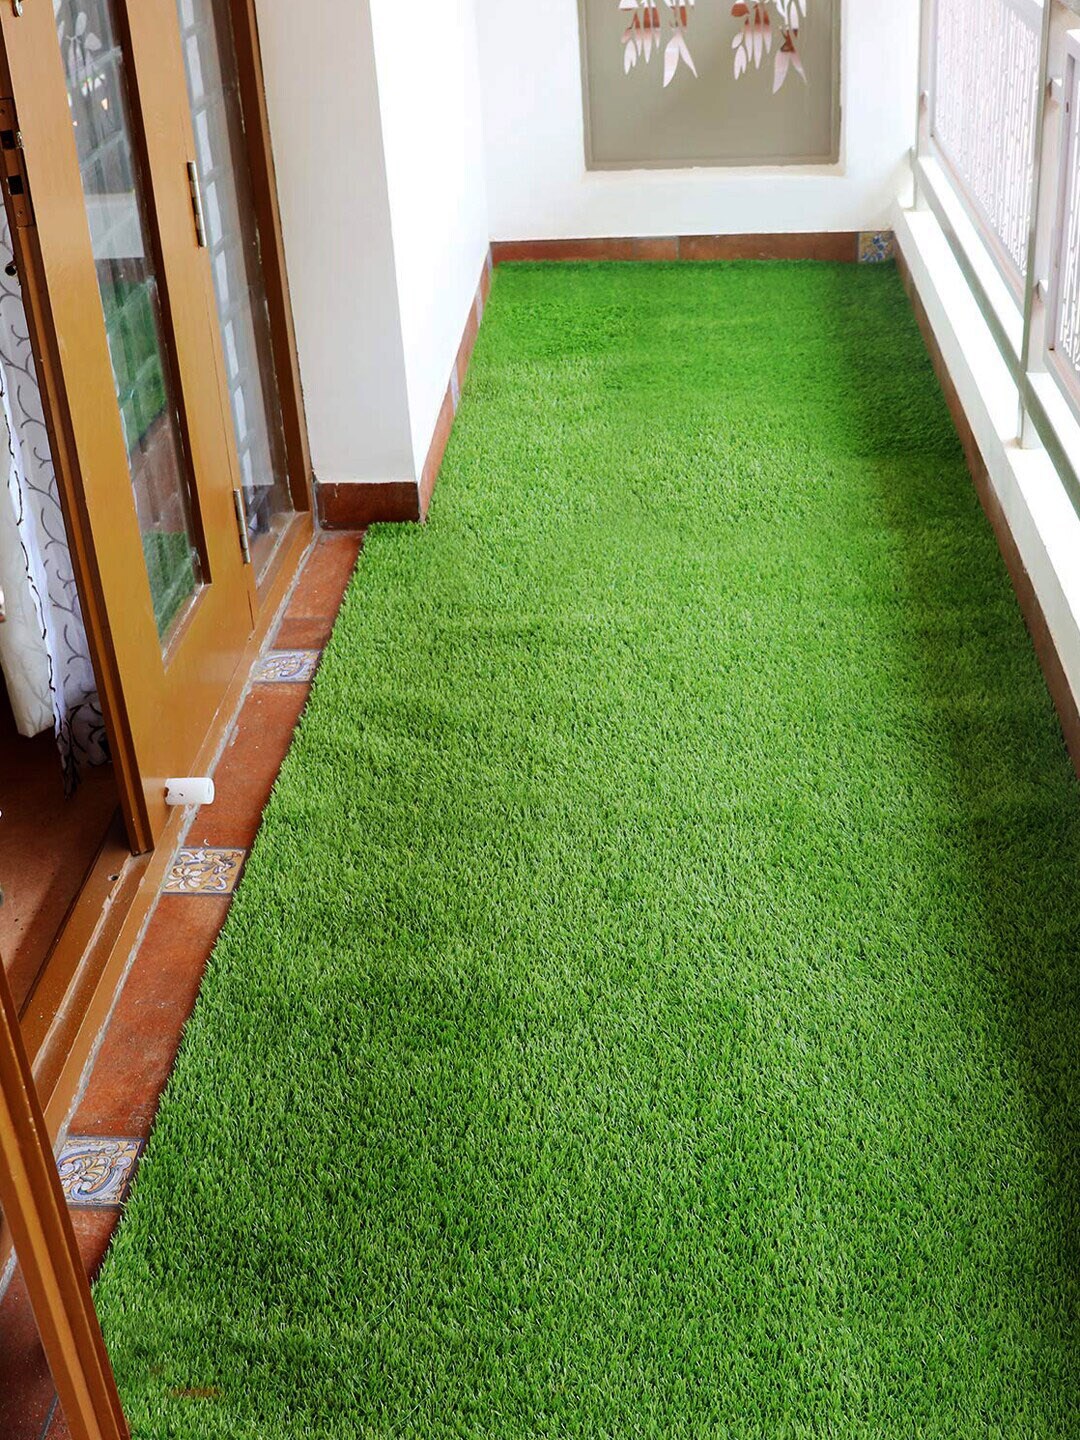 Kuber Industries Green Artificial Grass Carpet Price in India